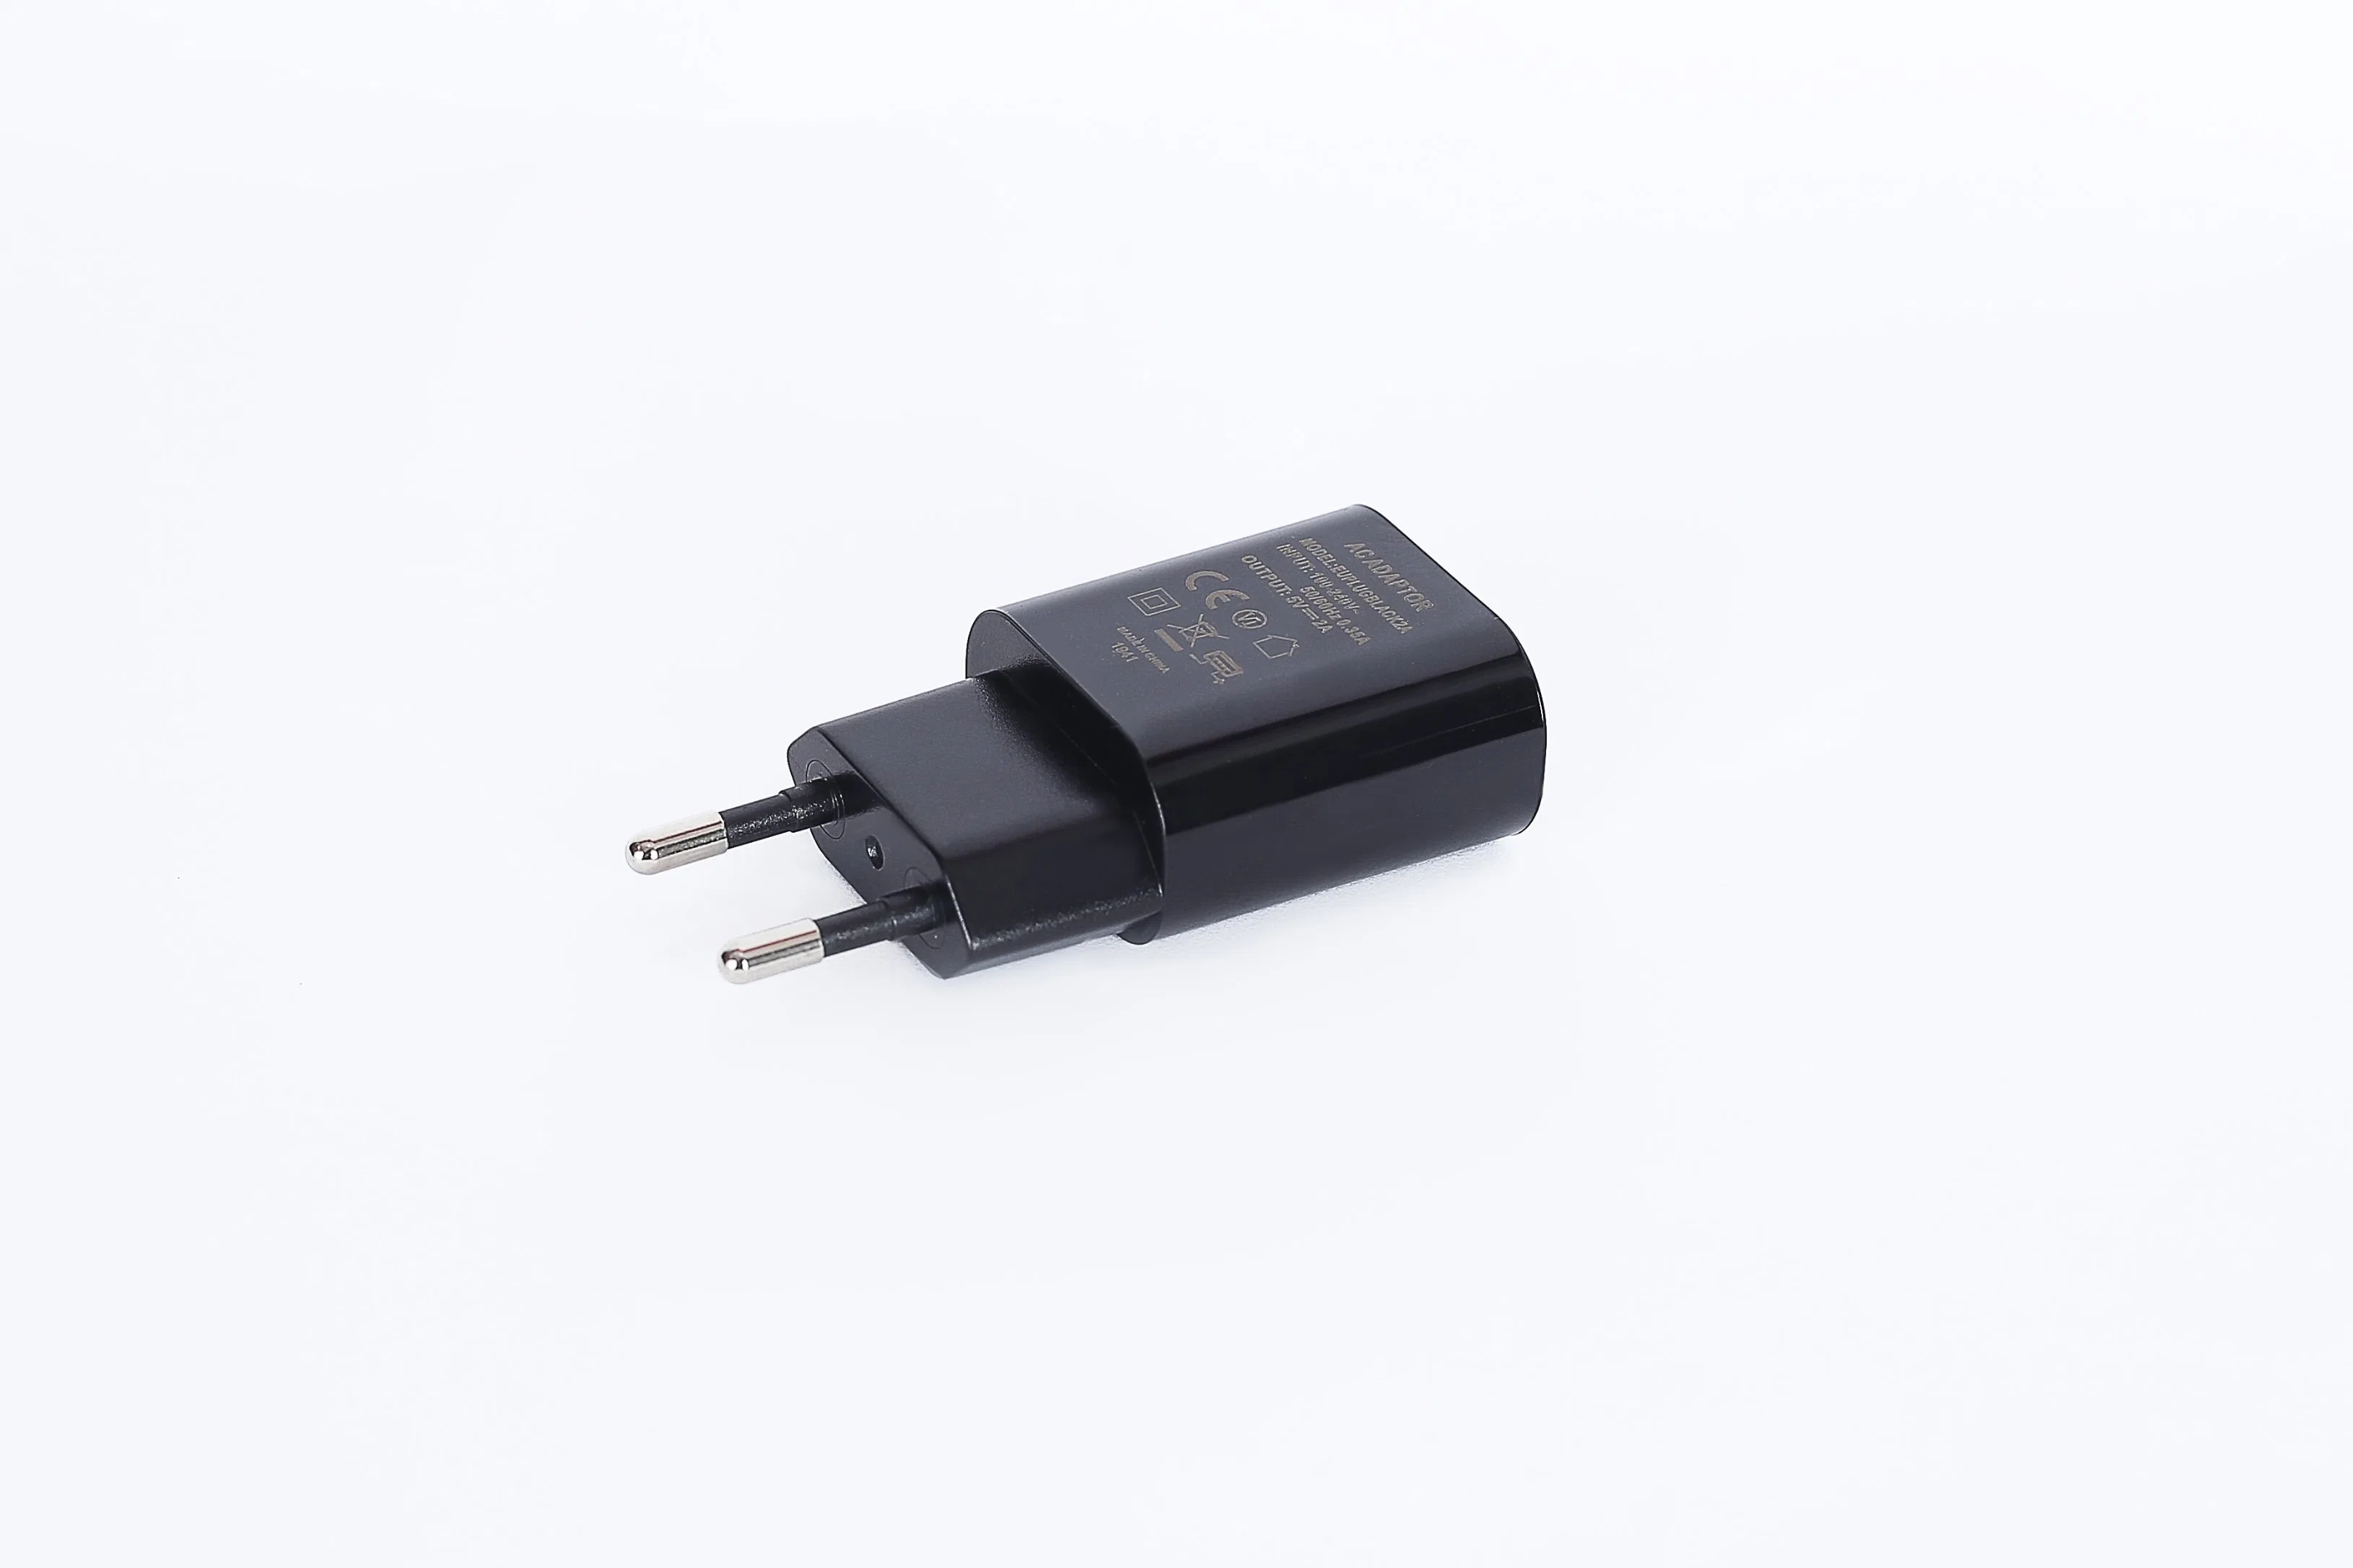 5V 2A USB Charger Mobile Power Supply Power Adapter